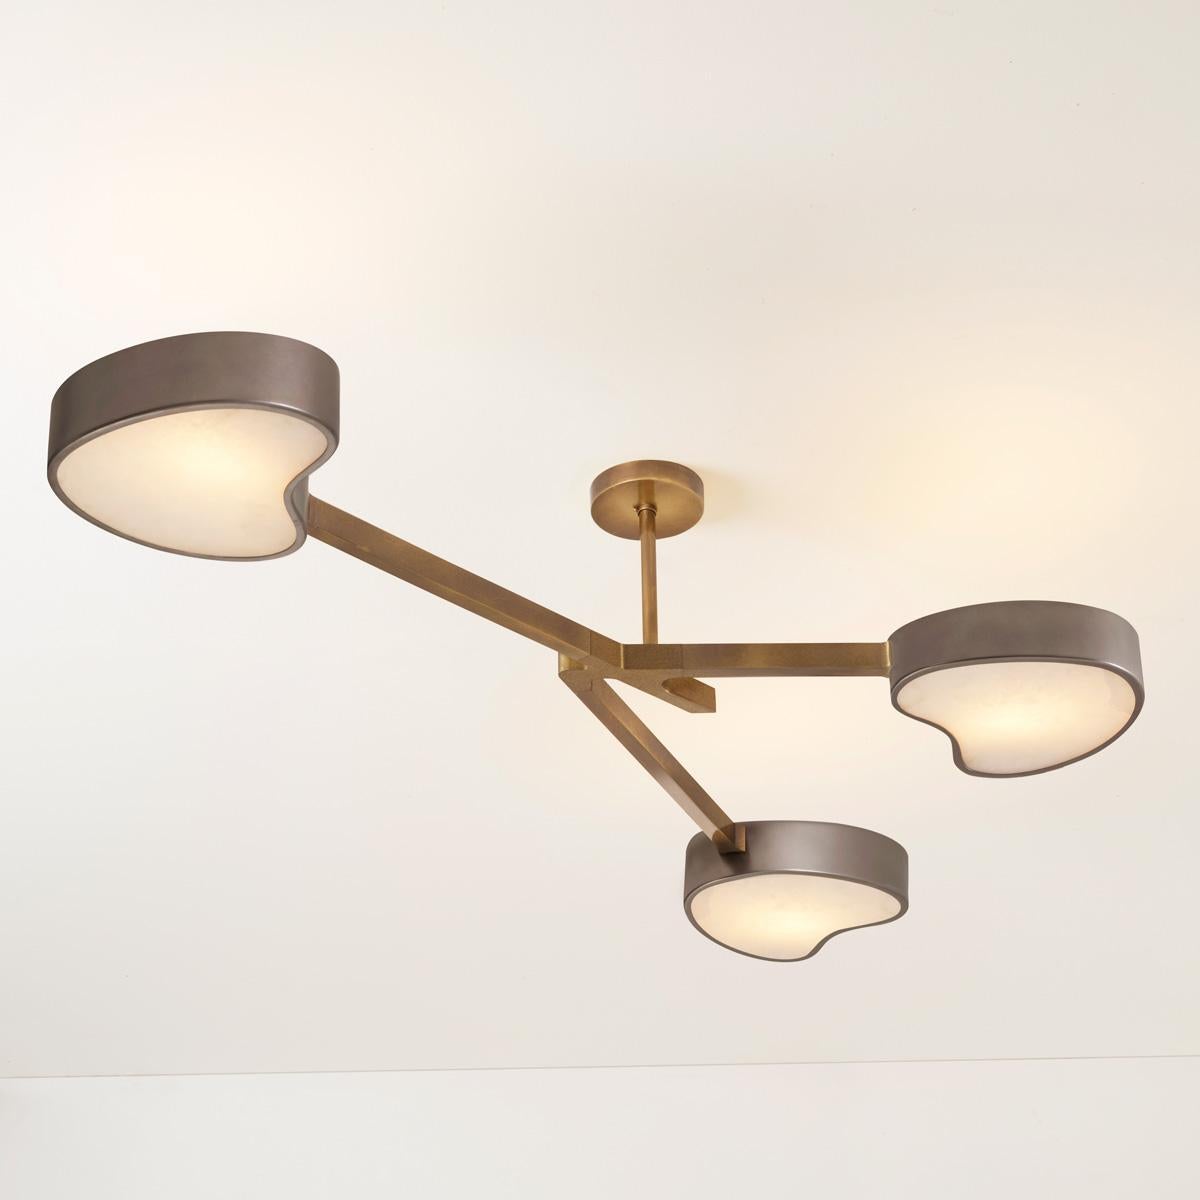 Cuore N.3 Ceiling Light by Gaspare Asaro. Bronze Finish For Sale 4